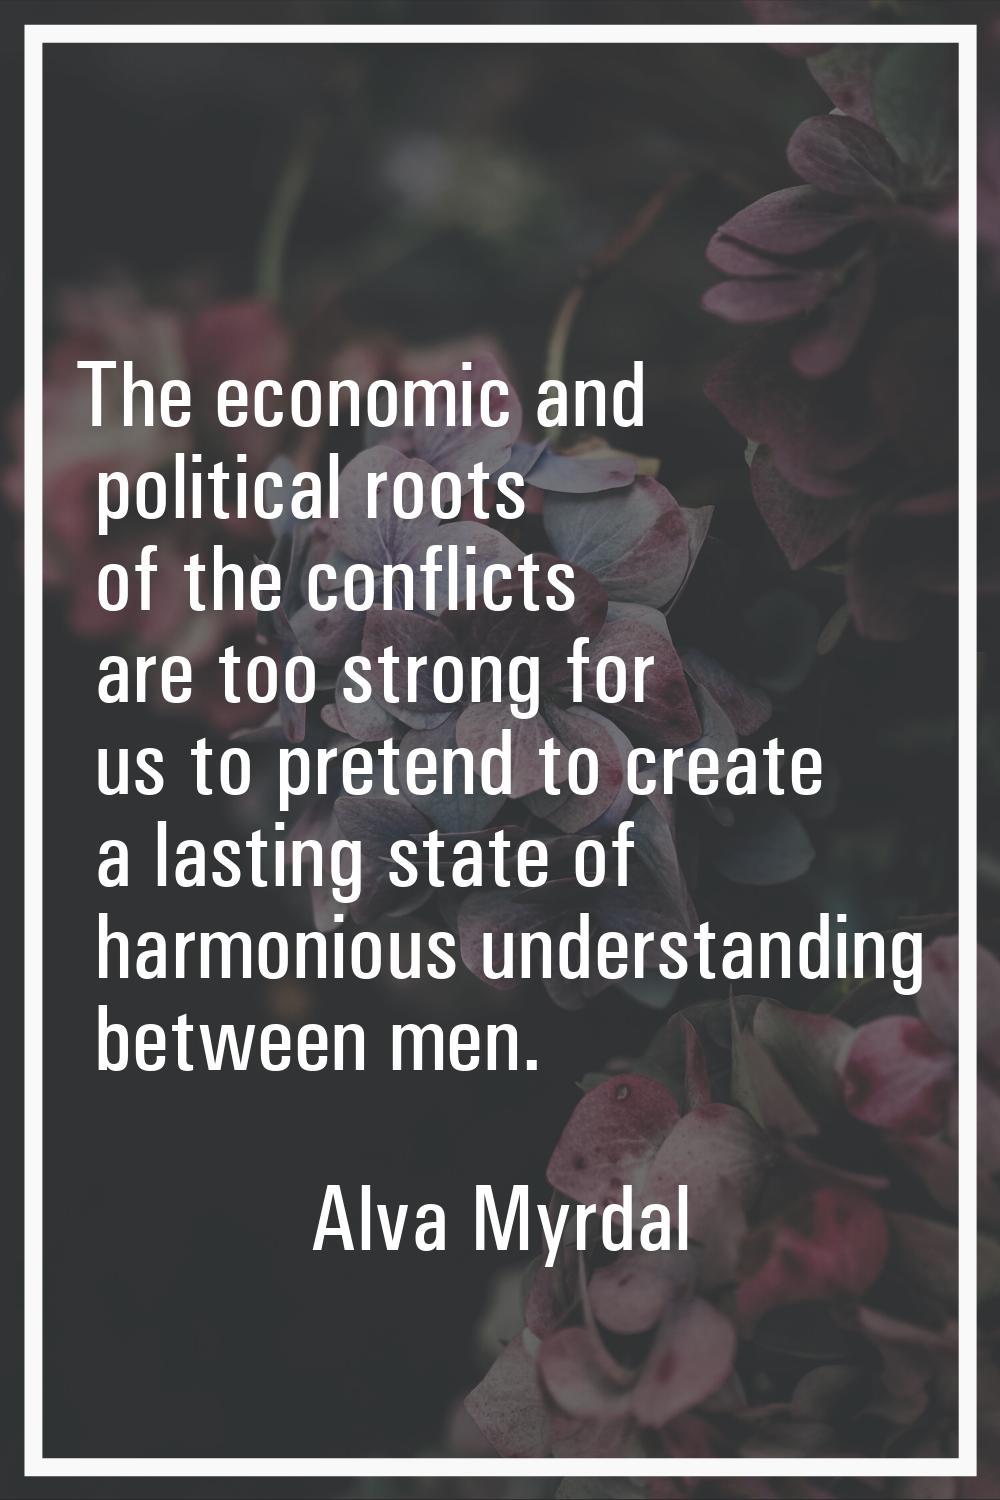 The economic and political roots of the conflicts are too strong for us to pretend to create a last